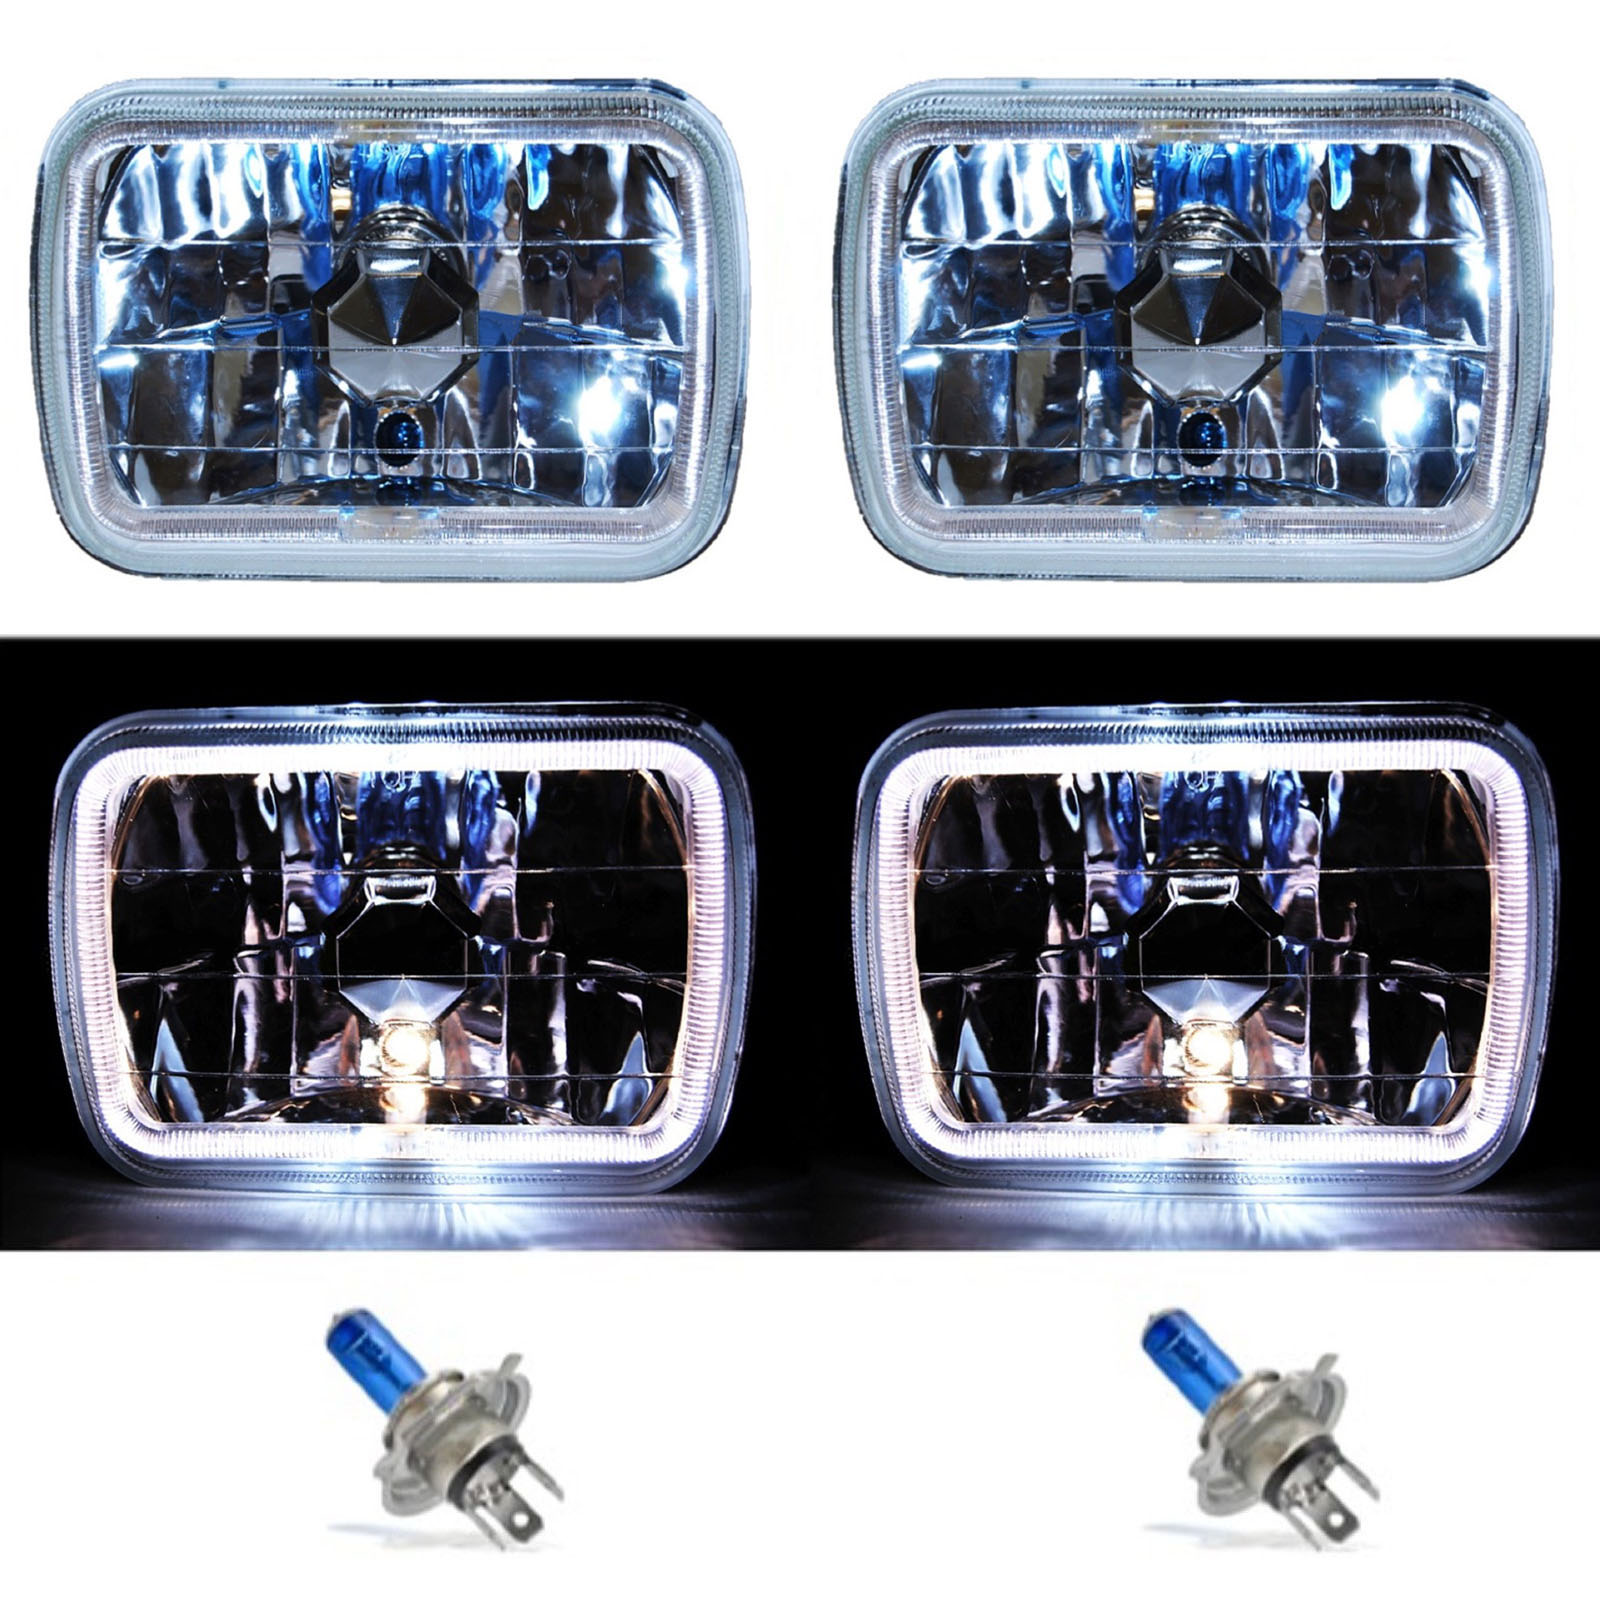 7" CLEAR HEADLIGHT WITH WHITE HALO  bLUE TURN SIGNAL HEADLIGHTS H4  55W